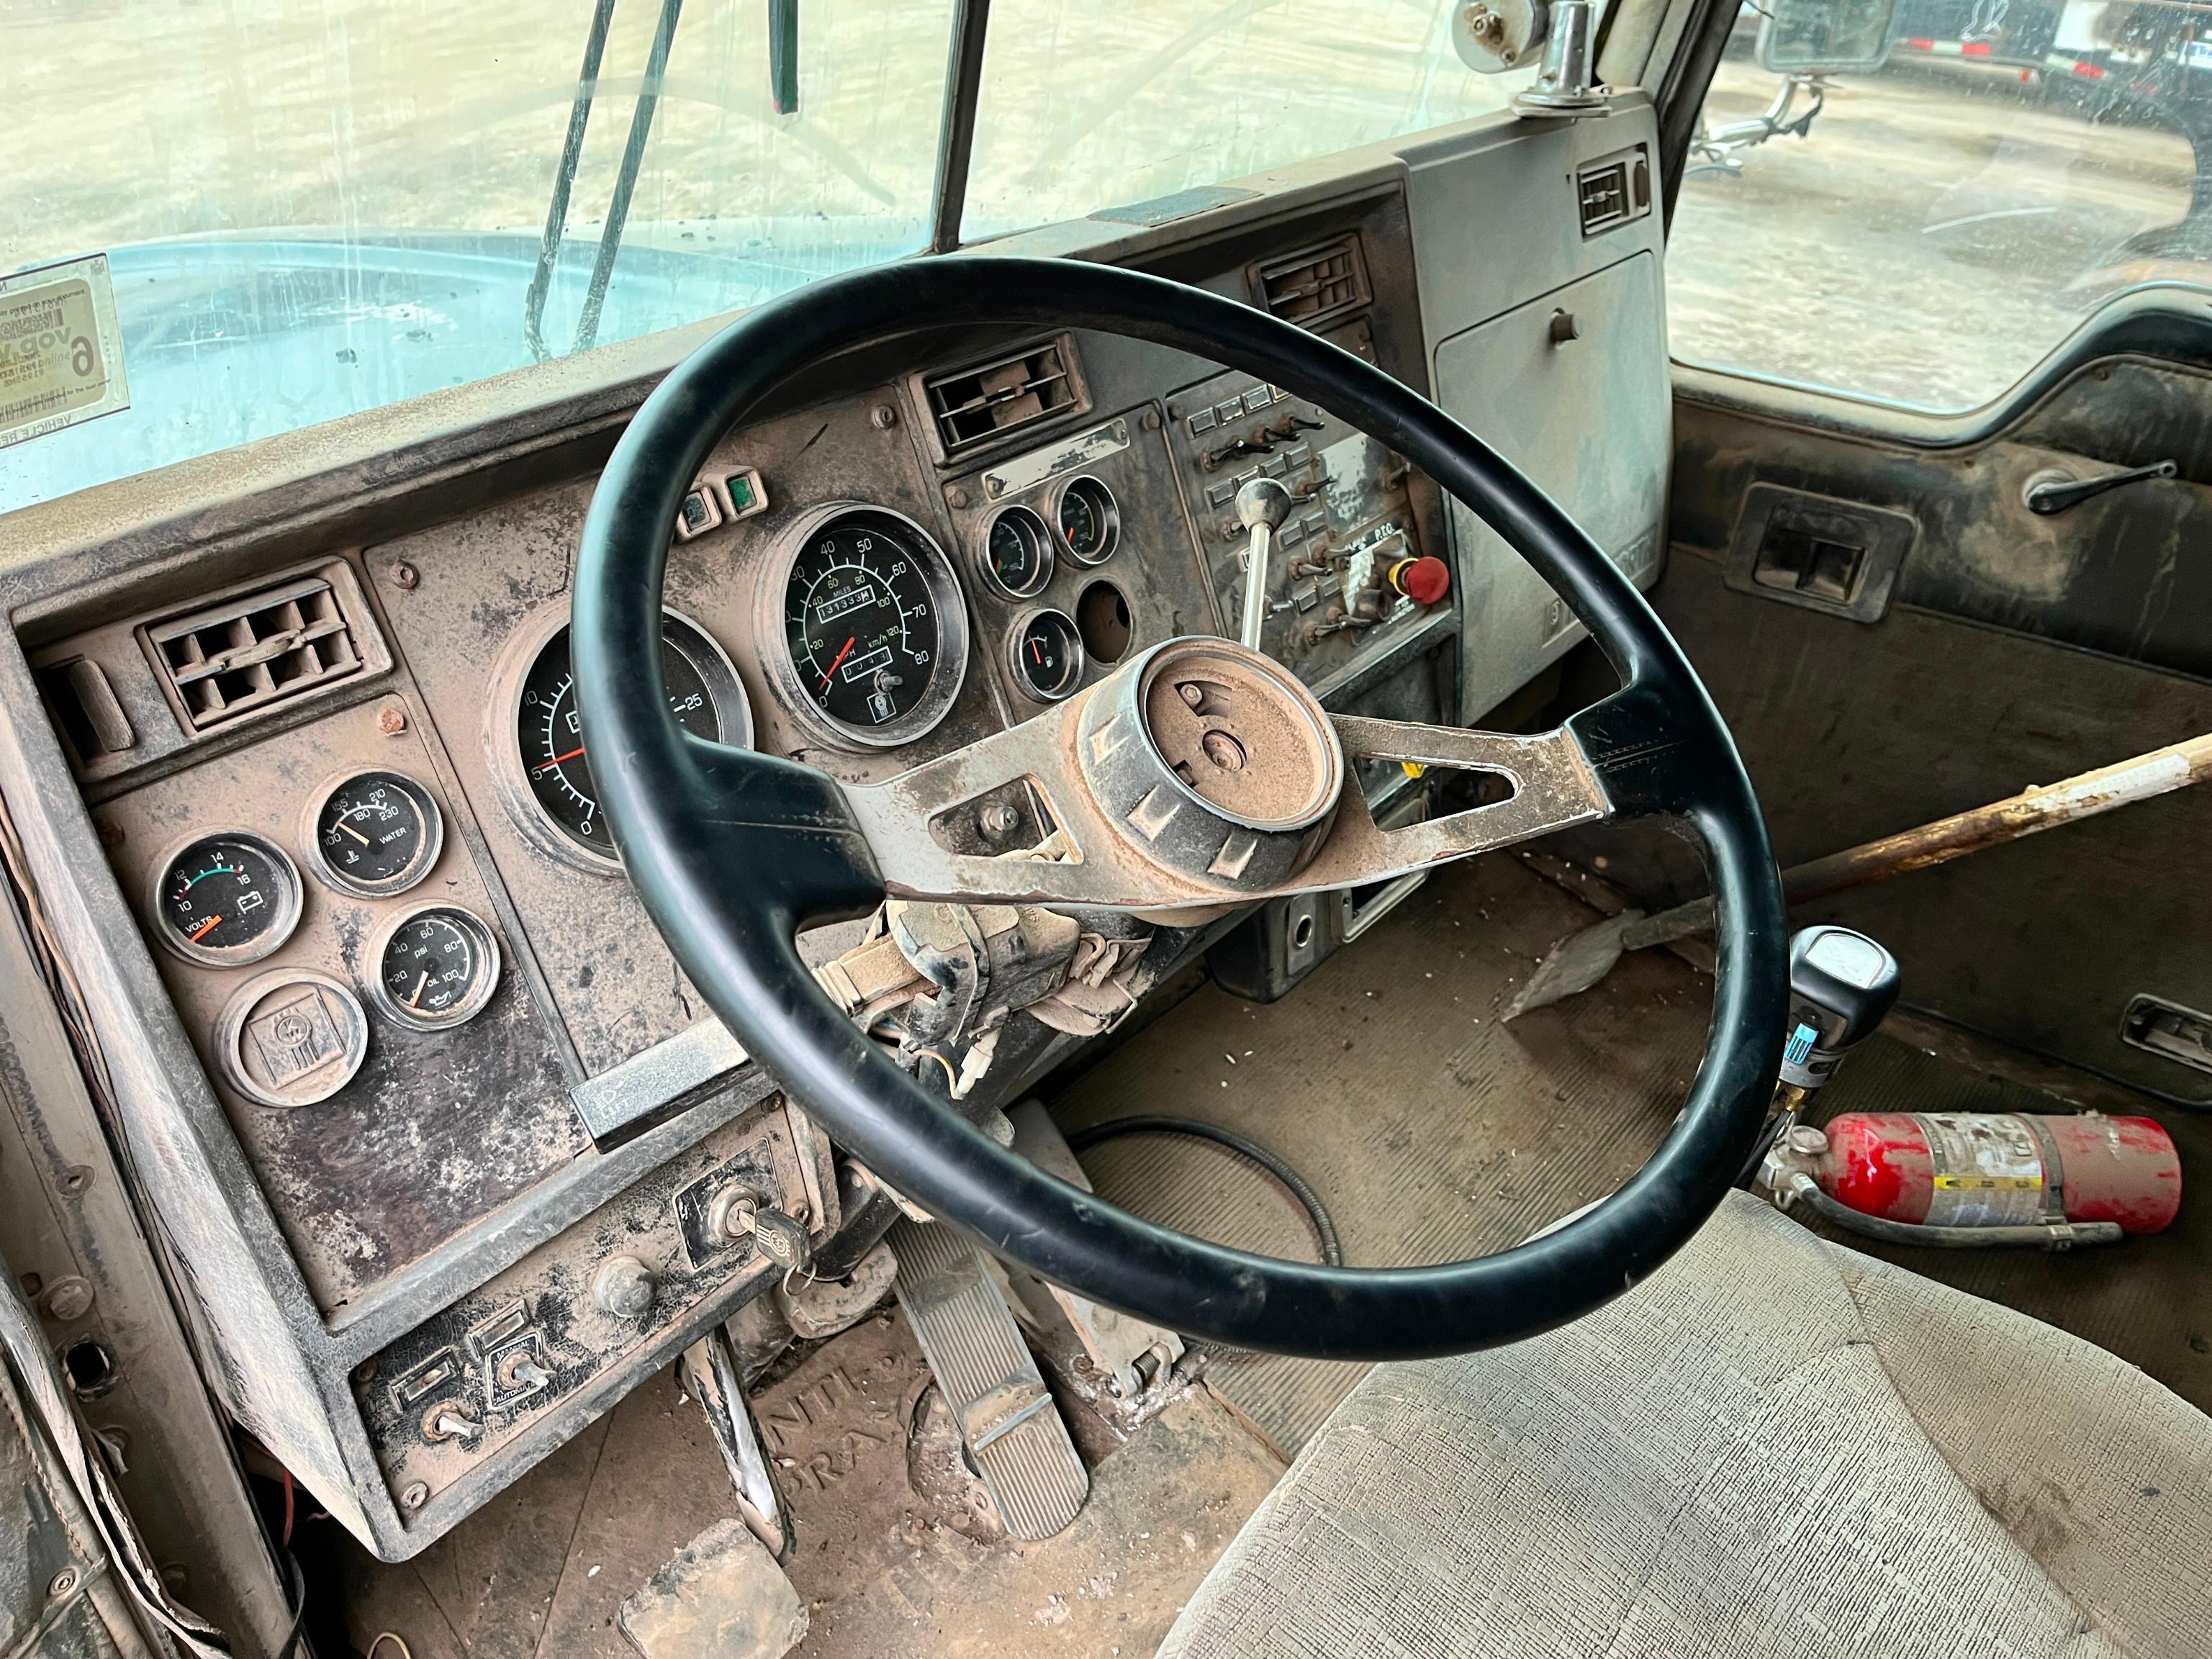 1995 KENWORTH T800 DUMP TRUCK VN:2NKDLE0X0SM682319 powered by Cat 3176 diesel engine, equipped with